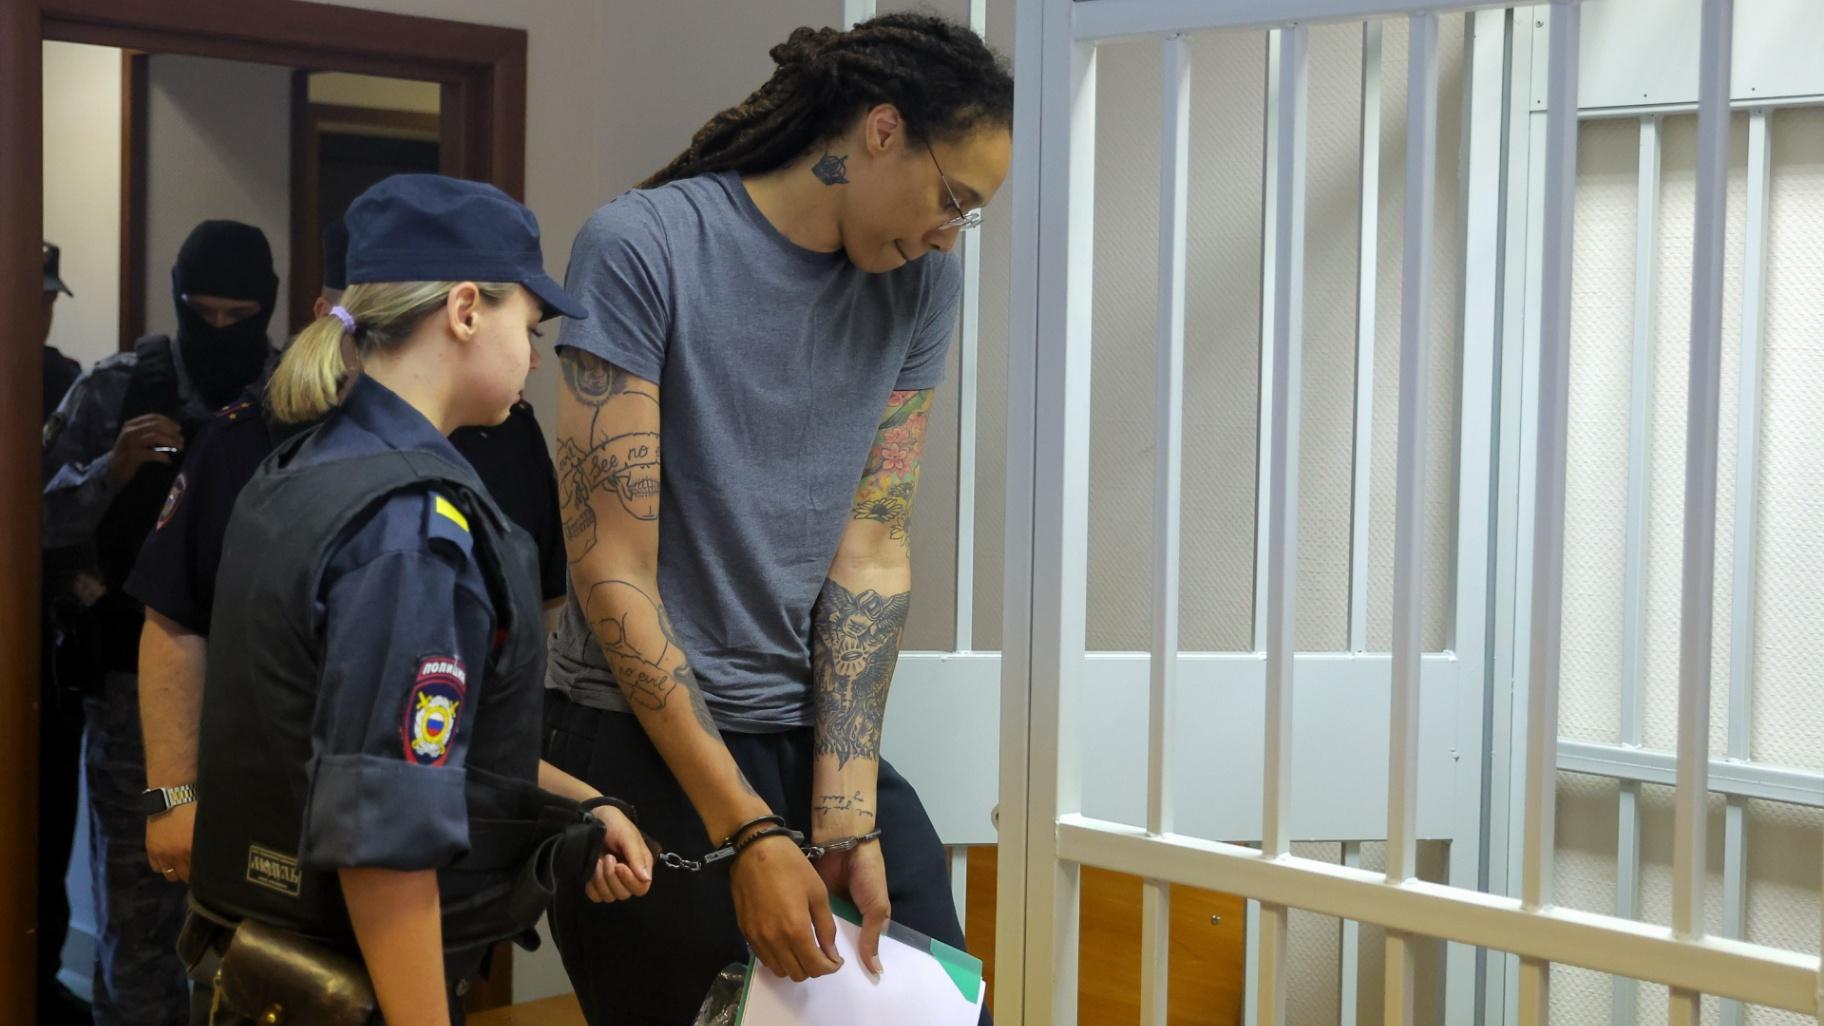 WNBA star and two-time Olympic gold medalist Brittney Griner, right, enters a cage in a courtroom prior to a hearing in Khimki just outside Moscow, Russia, Thursday, Aug. 4, 2022. (Evgenia Novozhenina / Pool Photo via AP)